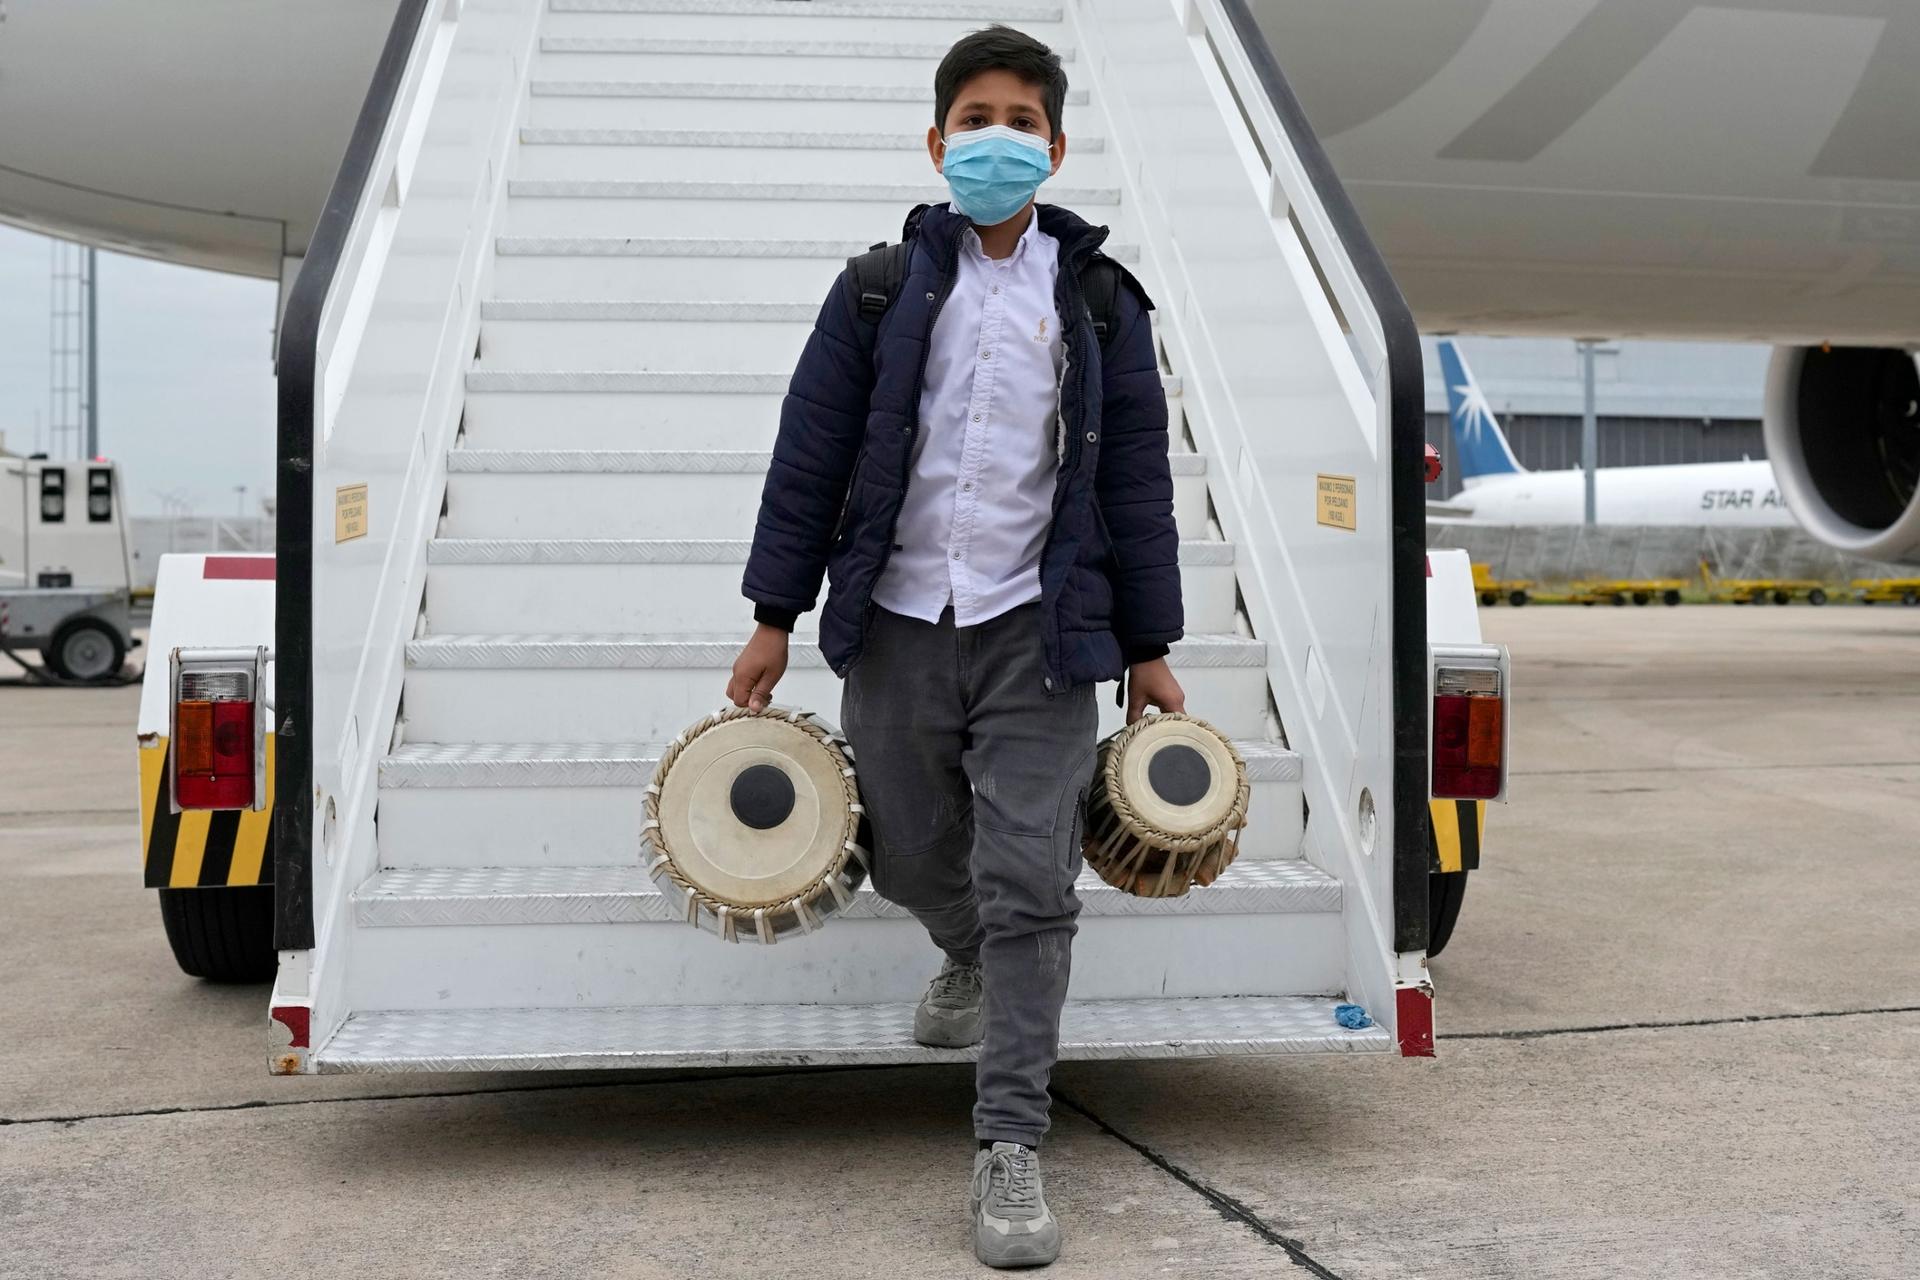 An Afghan boy carrying musical instruments disembarks from an airplane at Lisbon military airport, Monday, Dec. 13, 2021. 